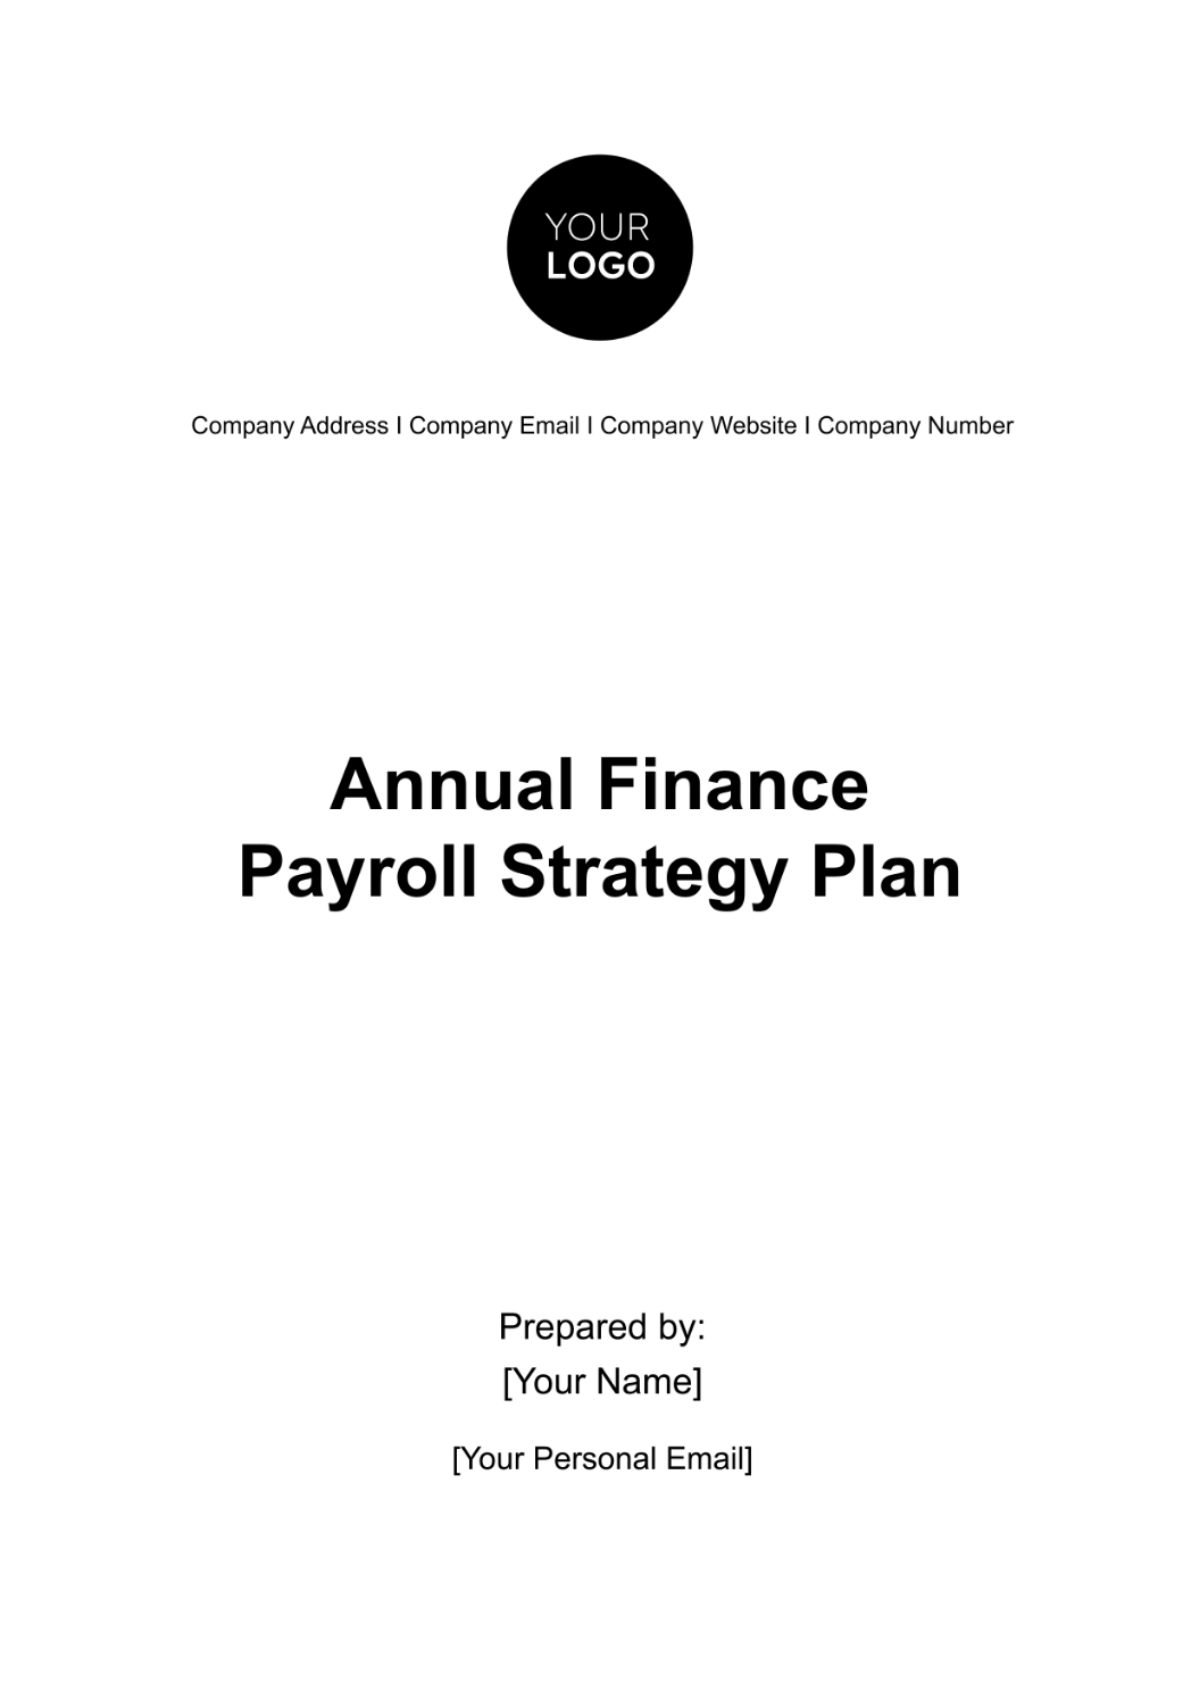 Annual Finance Payroll Strategy Plan Template